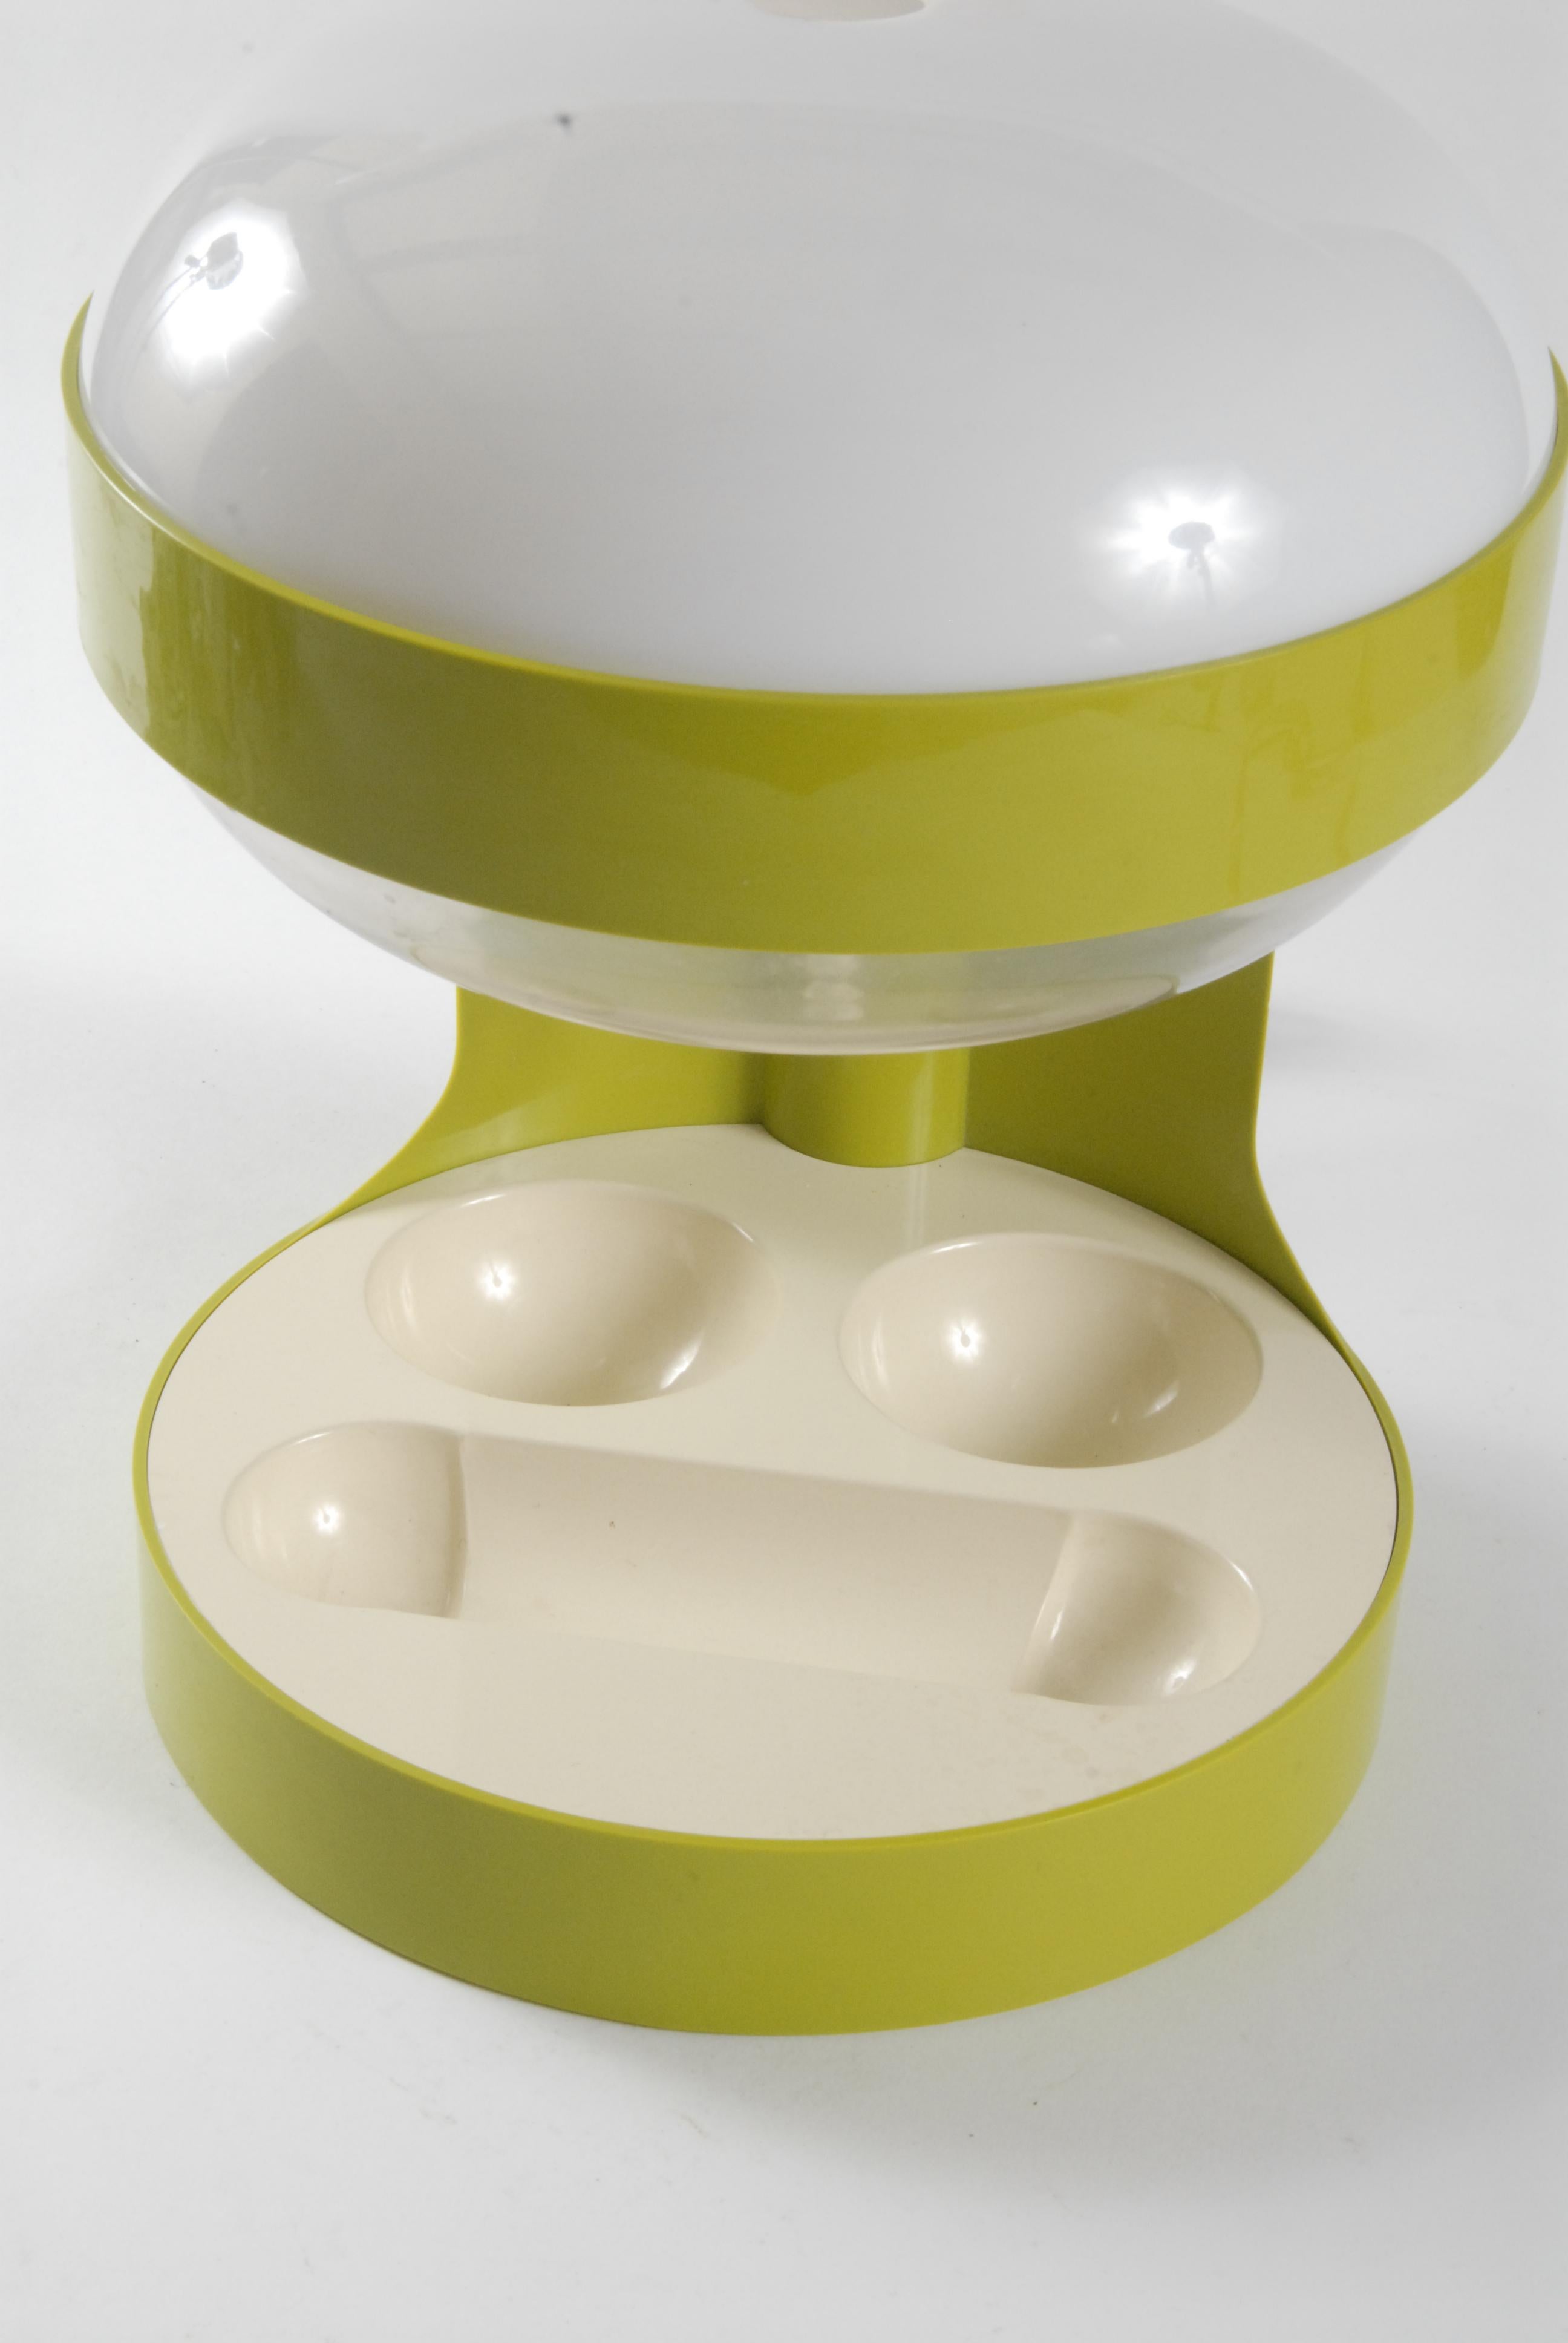 Classic space age designed green table lamp by Joe Colombo for Kartell and licensed manufacture by Advance Industries Australia.

The KD29 table lamp is made entirely of plastic and has a tray for pens and small office equipment.
The top diffuser